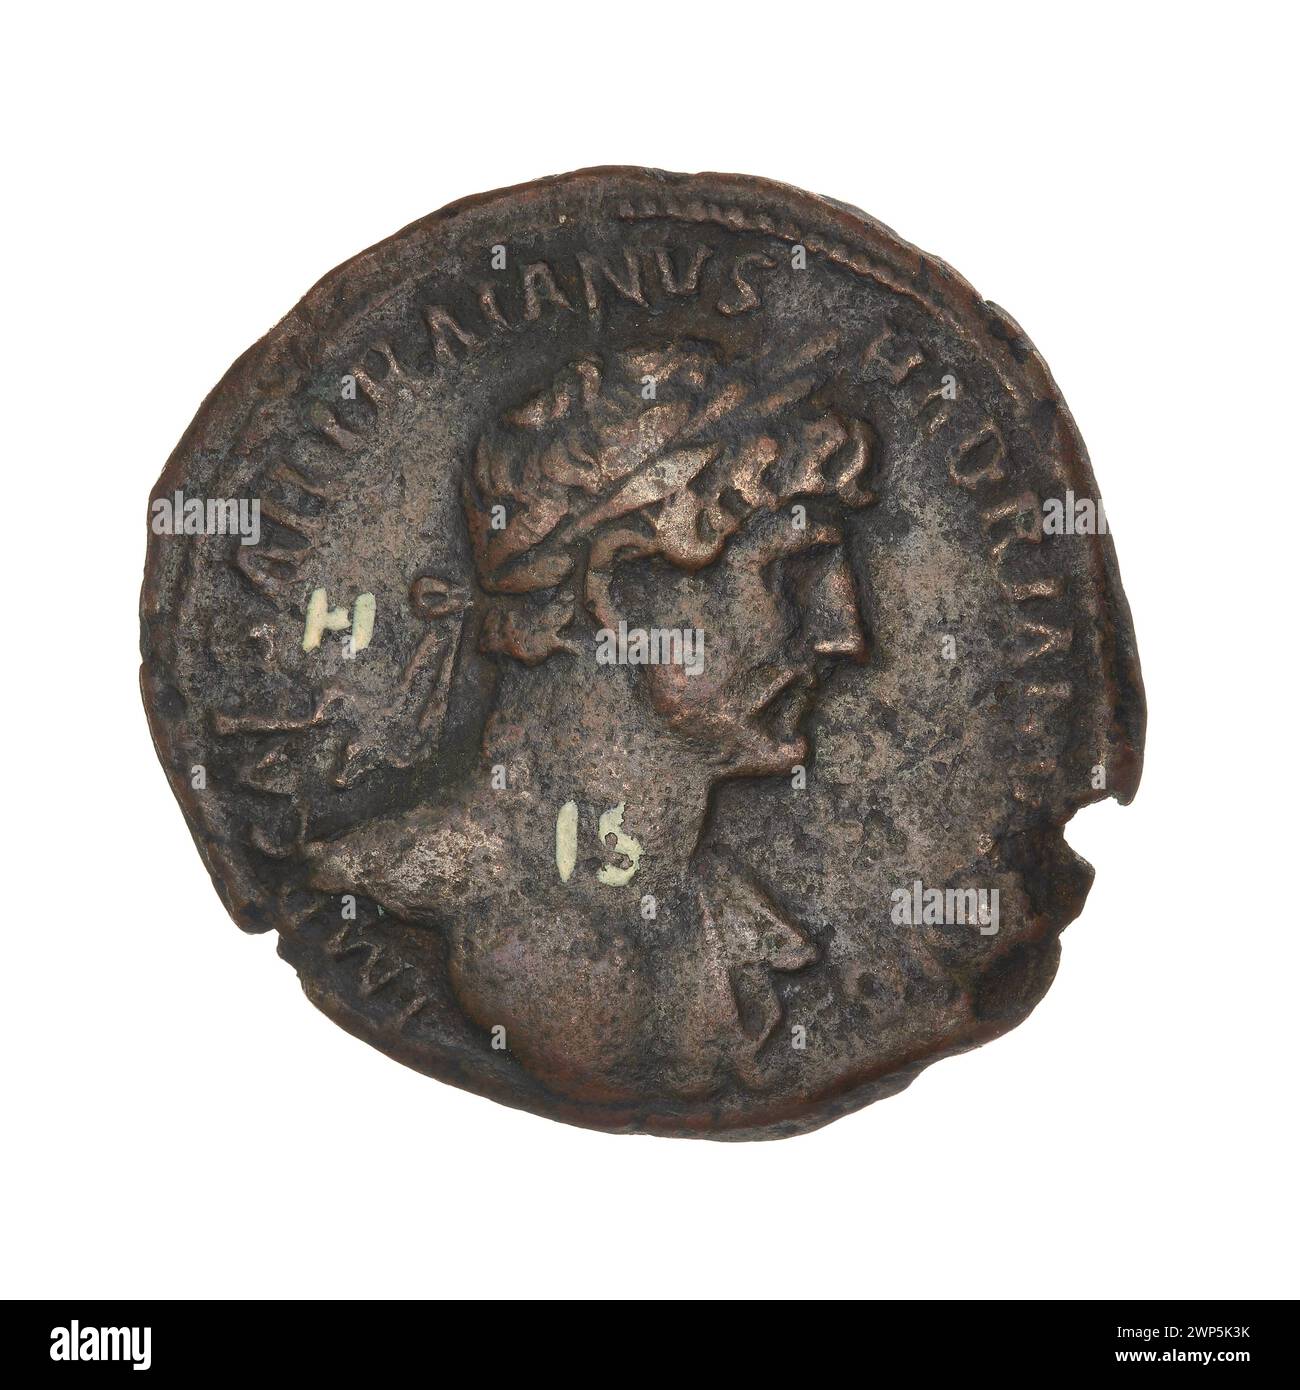 AS; Hadrian (76-138; Roman emperor 117-138); 119 (118-00-00-118-00-00);Coin (personification), busts, laurel wreaths, spears Stock Photo